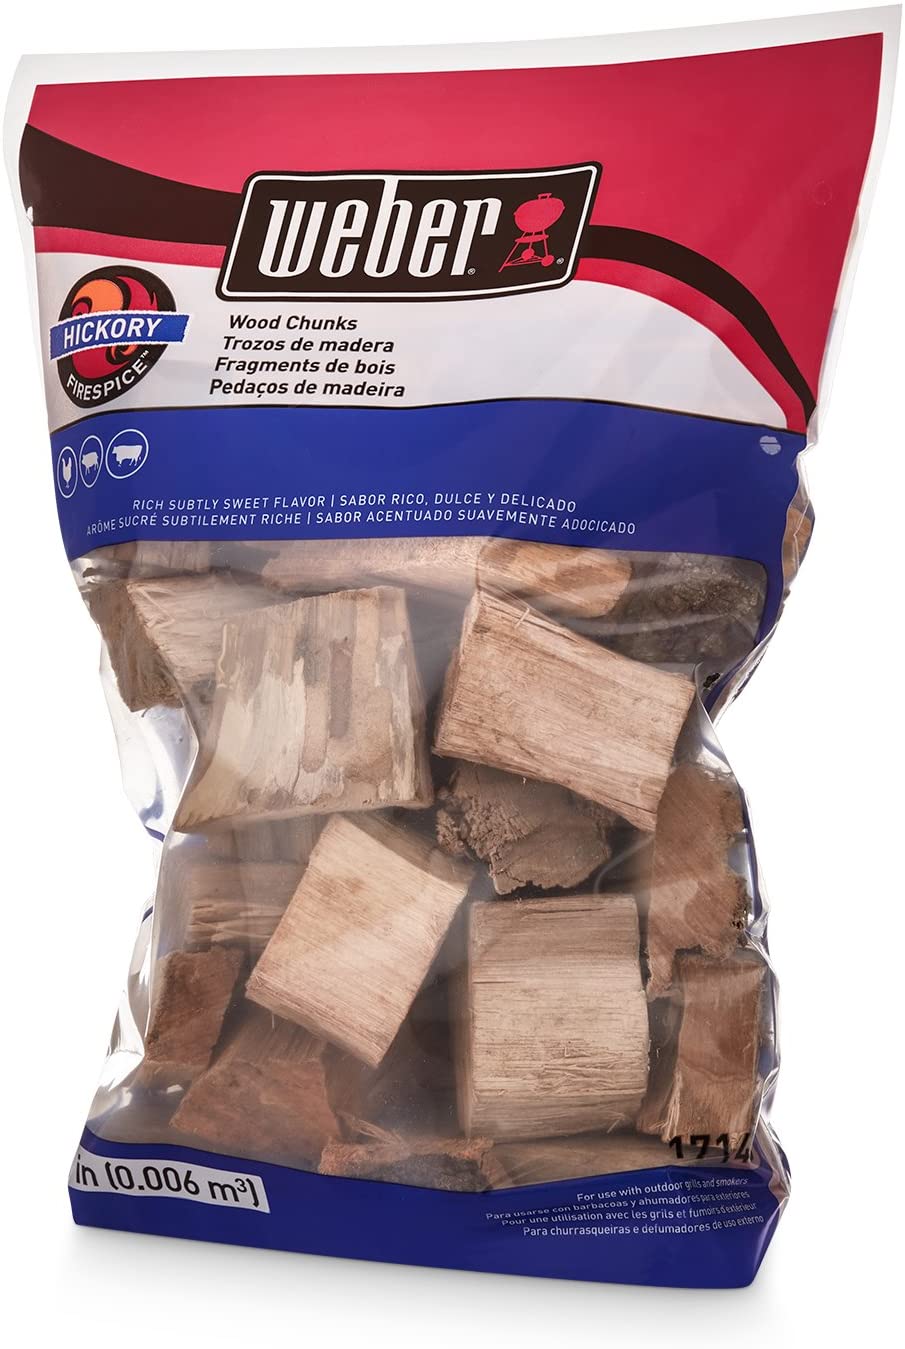 Weber 17148 Hickory Wood Chunks, 350 cu. in. (0.006 Cubic Meter), 4 lb